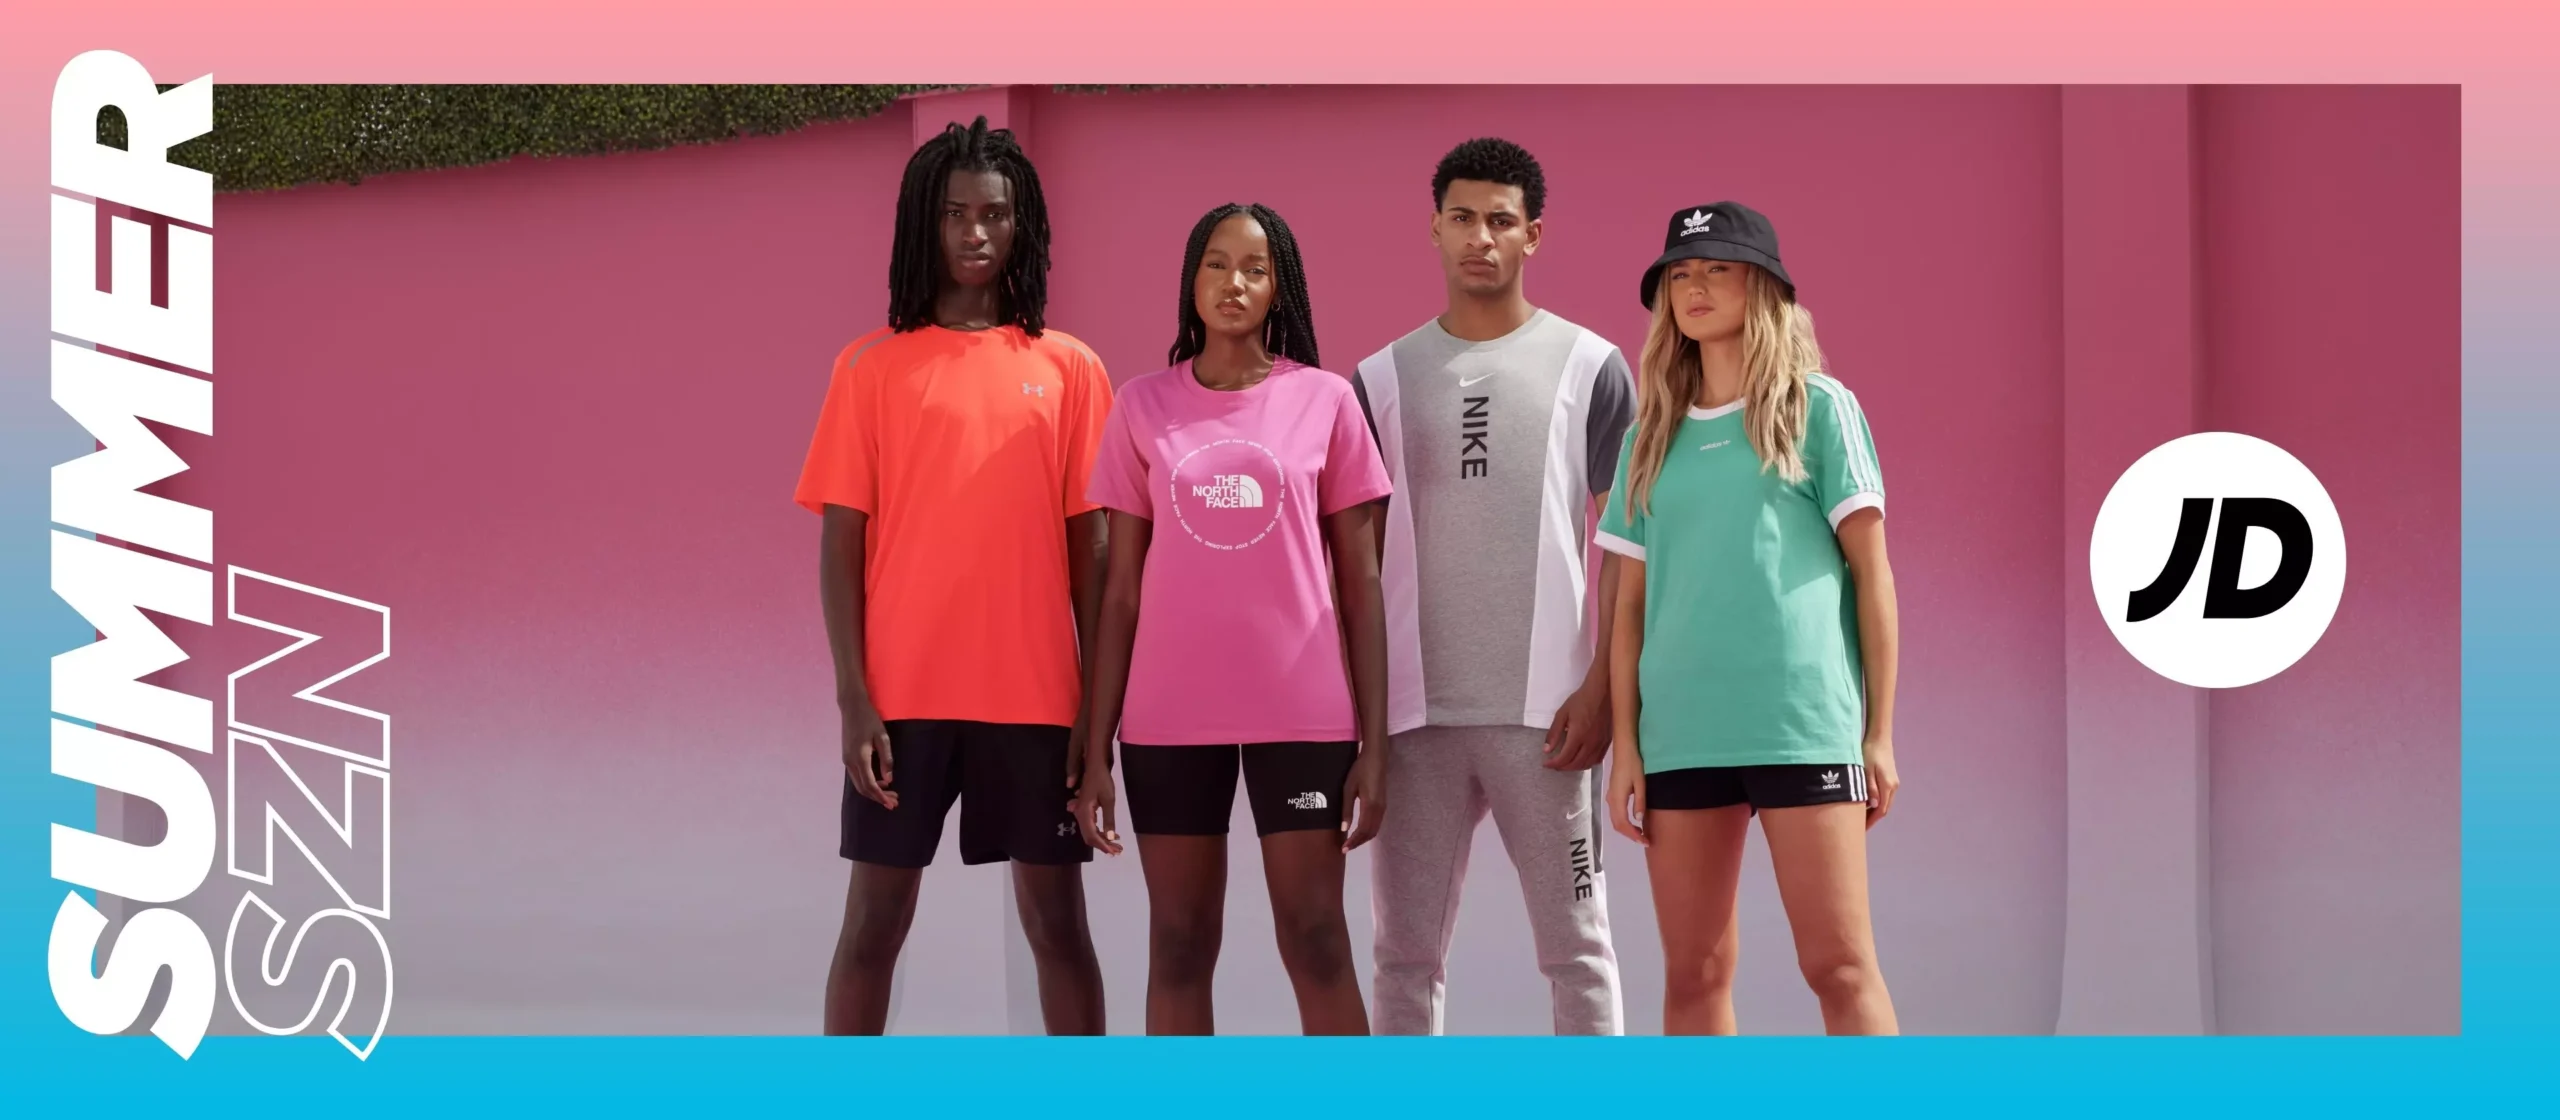 4 models wearing clothes from JD Sports Summer Season